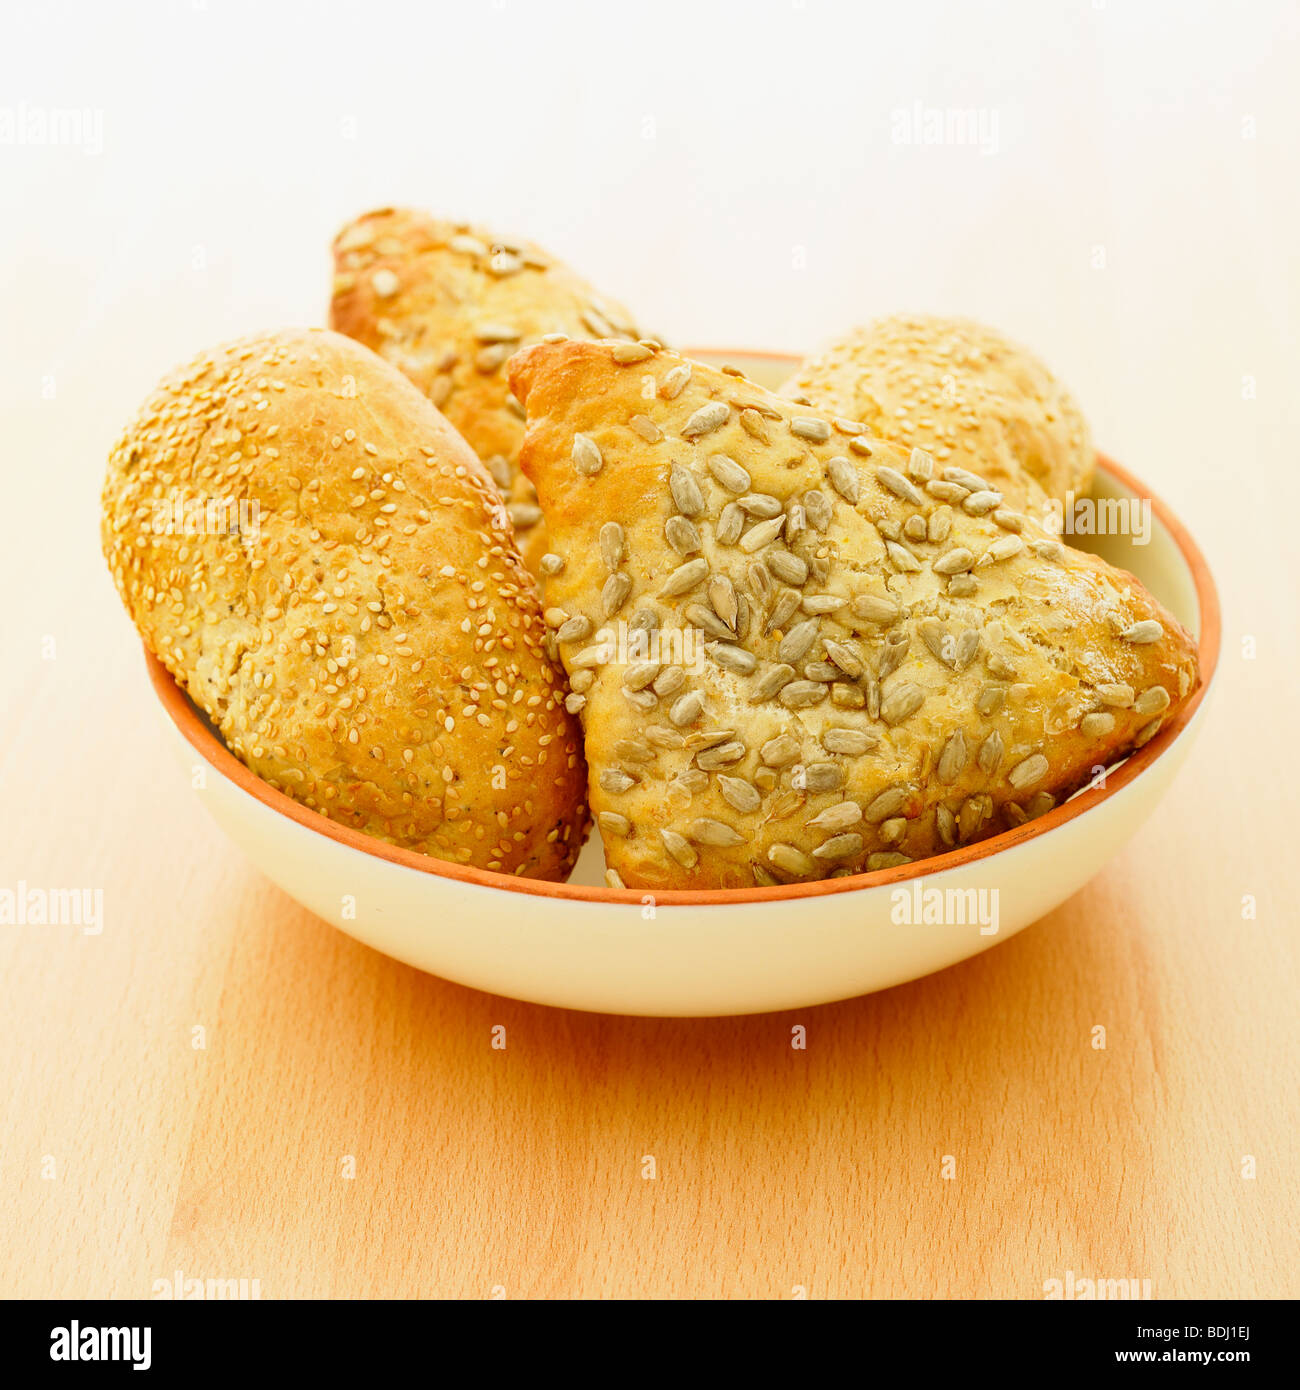 A selection of fresh rustic wholemeal bread rolls in a bowl. Stock Photo